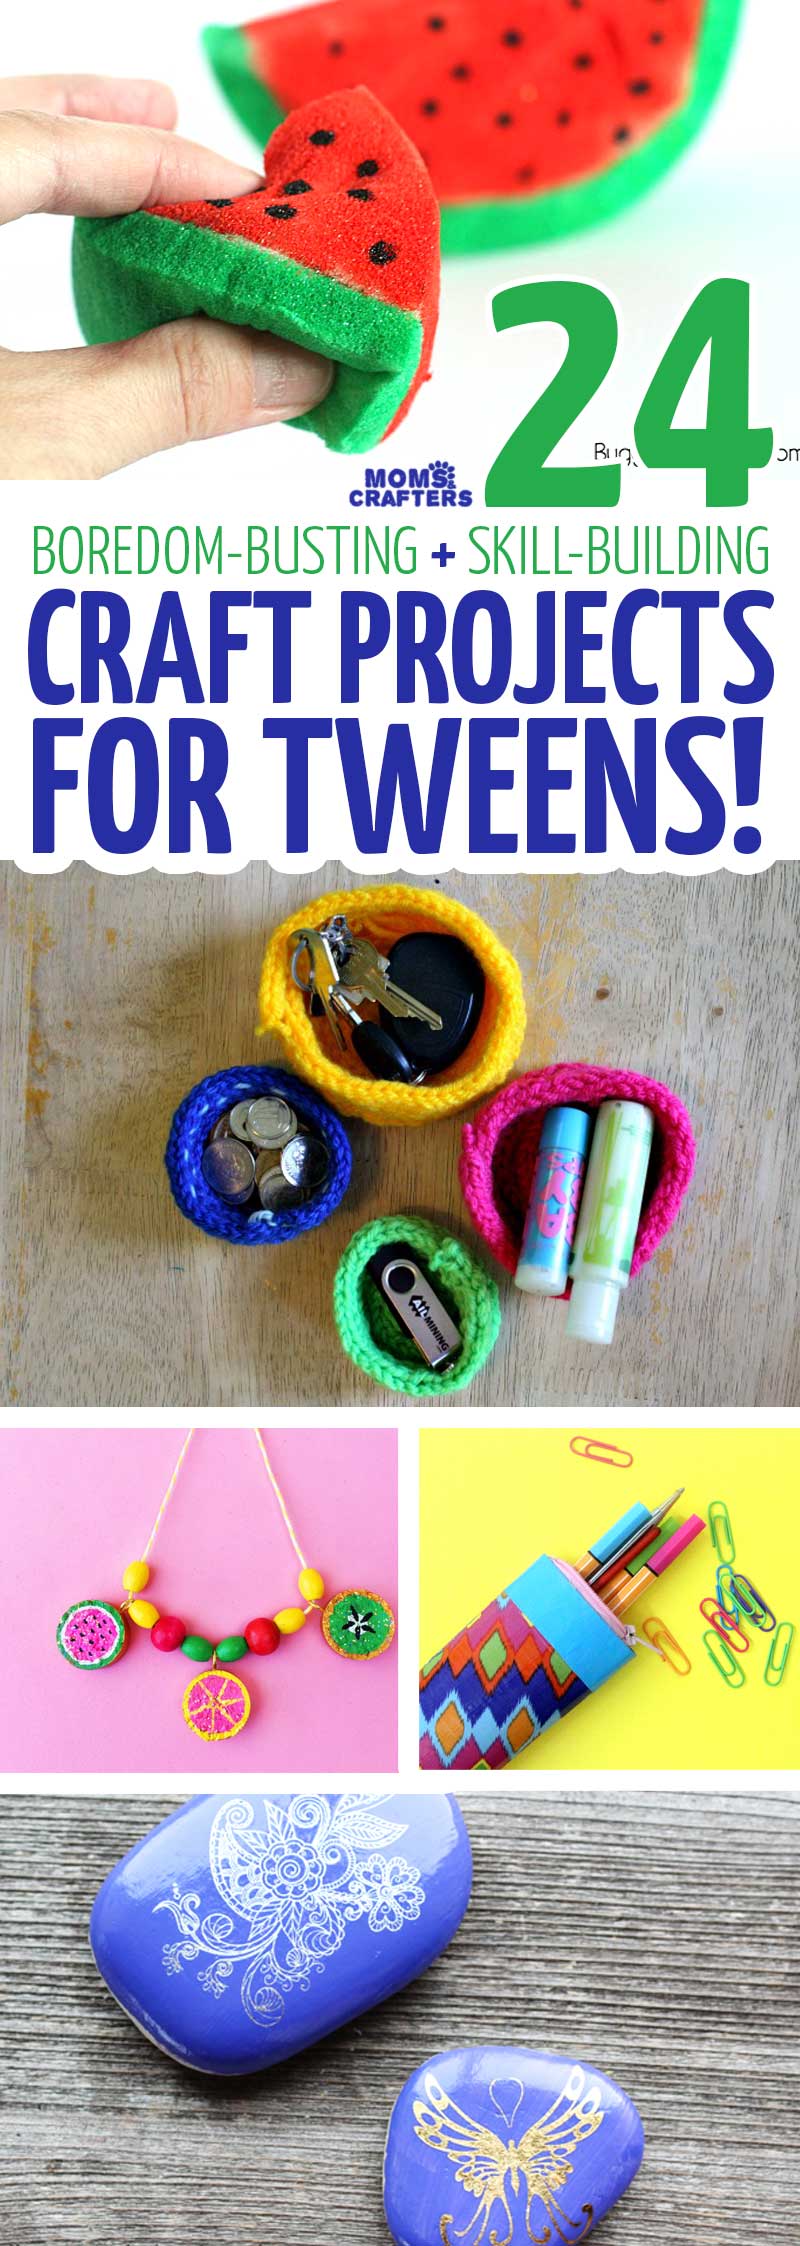 Cool Crafts for Teen Girls - DIY Projects for Teens